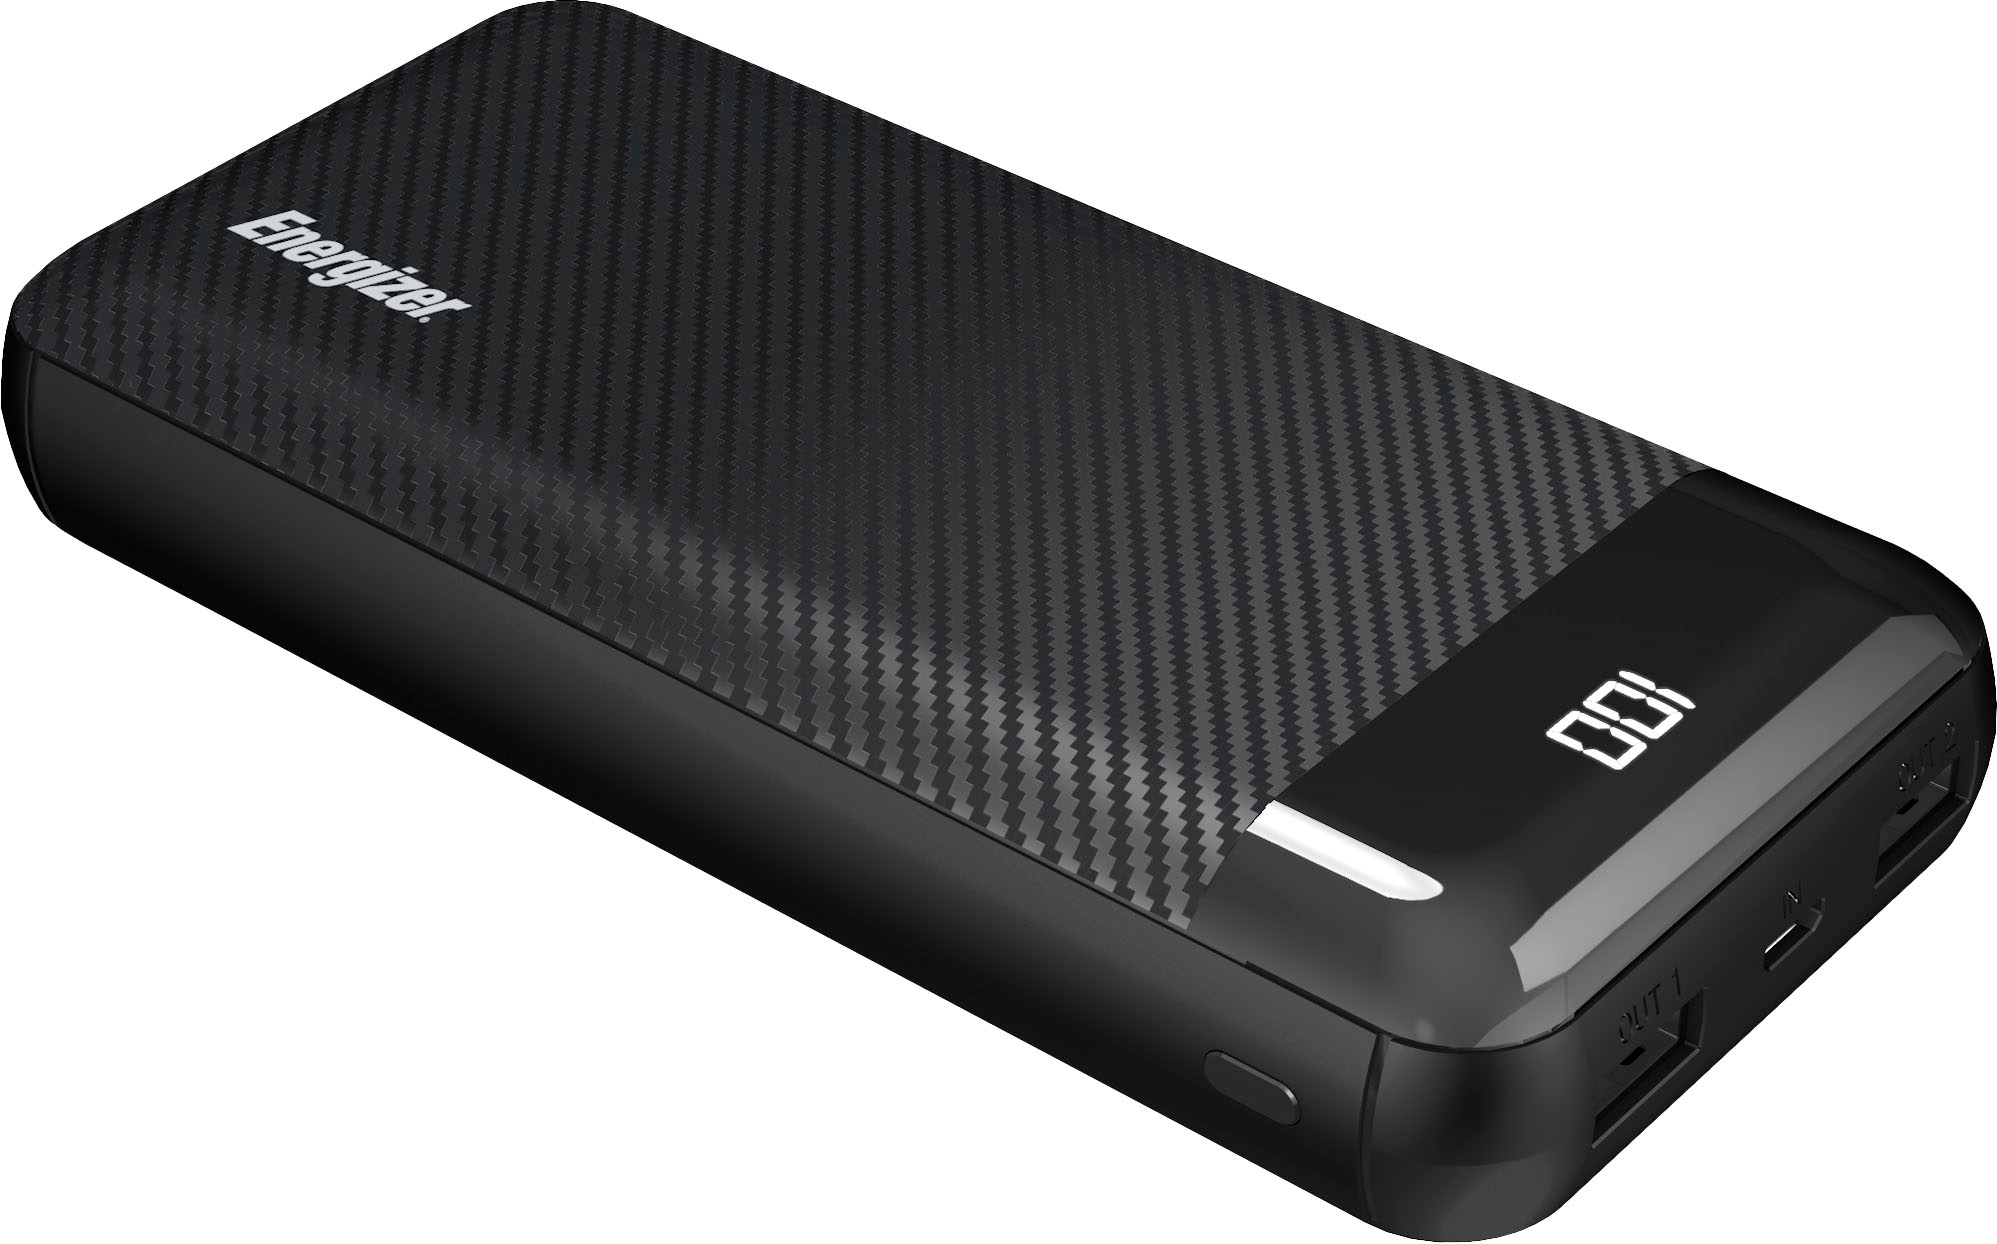 Energizer MAX 20,000mAh 15W USB-C 3-Port Universal Portable Battery Charger/Power  Bank w/ LCD screen for Smartphones & Accessories Black UE20068 - Best Buy